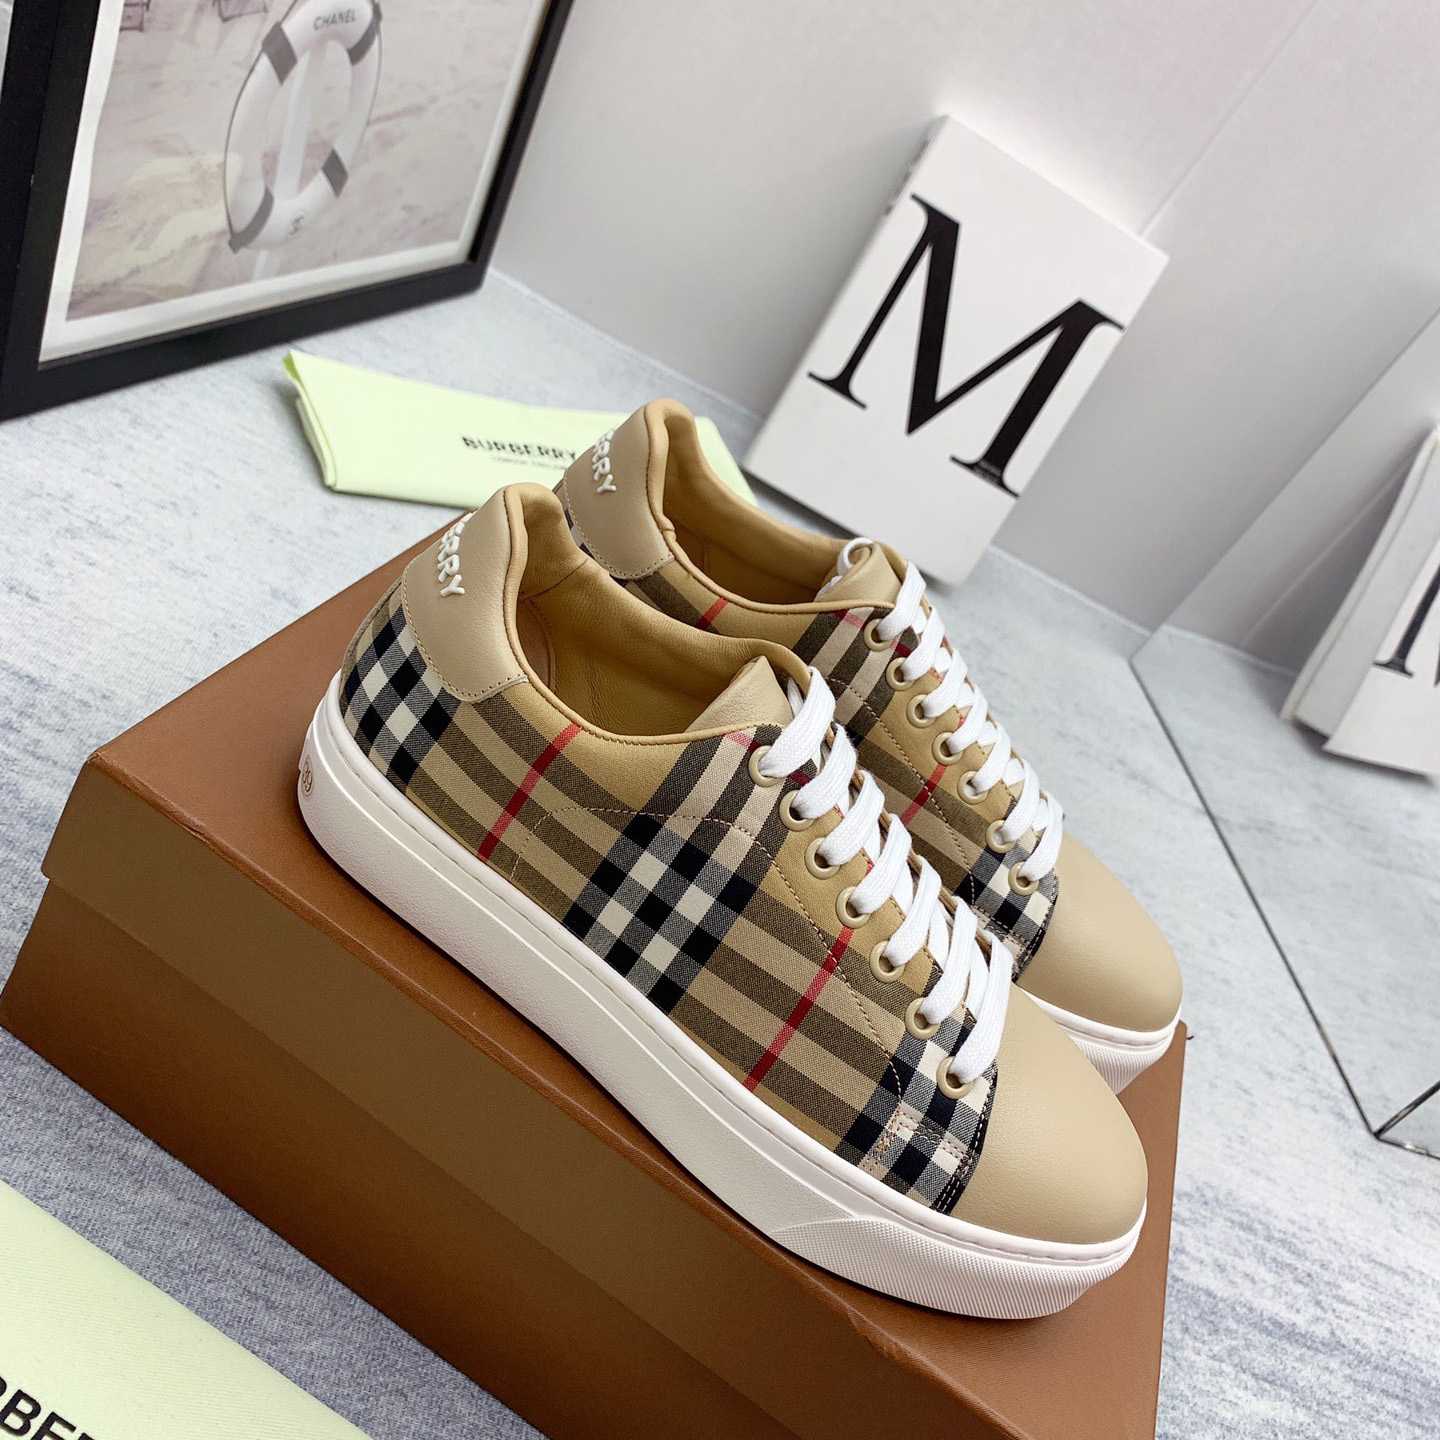 Burberry Vintage Check and Leather Sneakers - DesignerGu